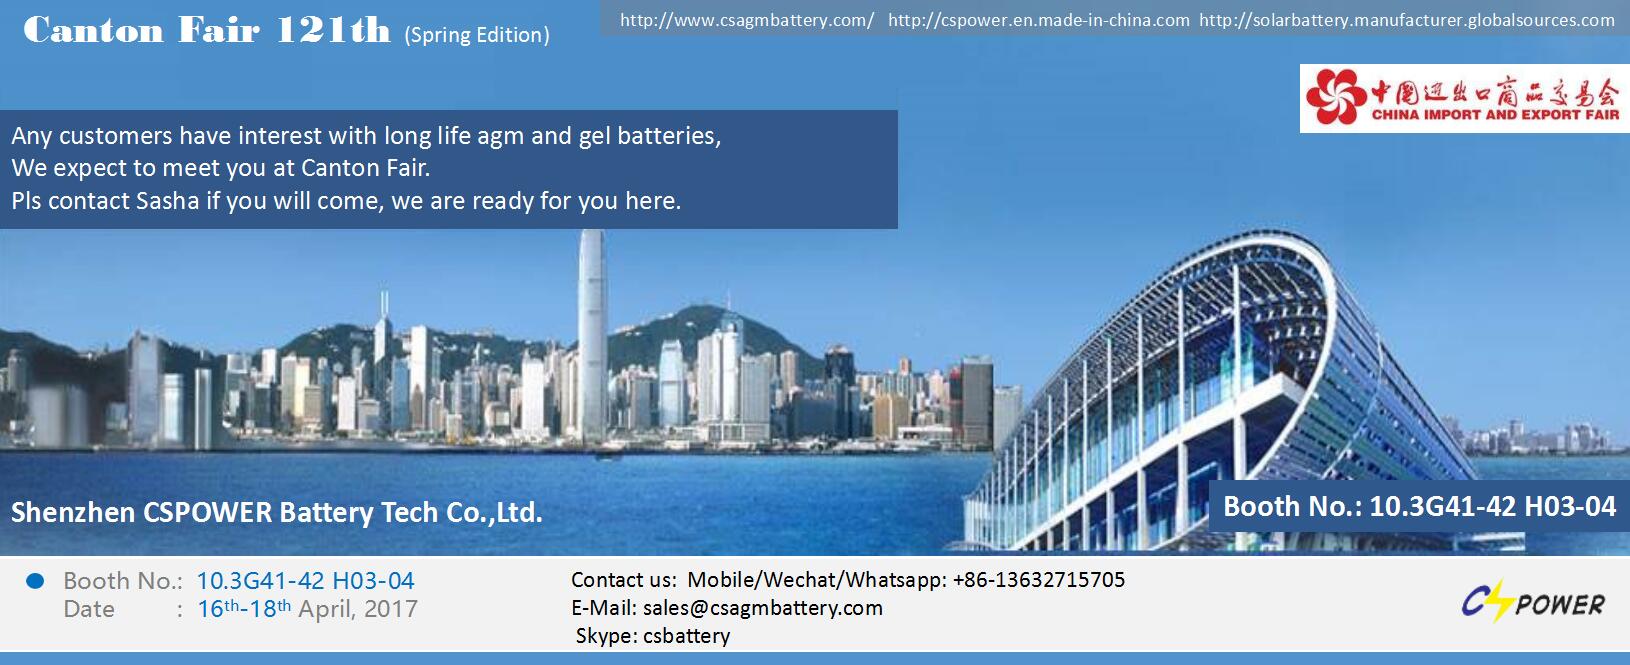 CSPOWER ATTEND CANTON FAIR 121th BOOTH NUMBER 10.3G41-42 H03-04